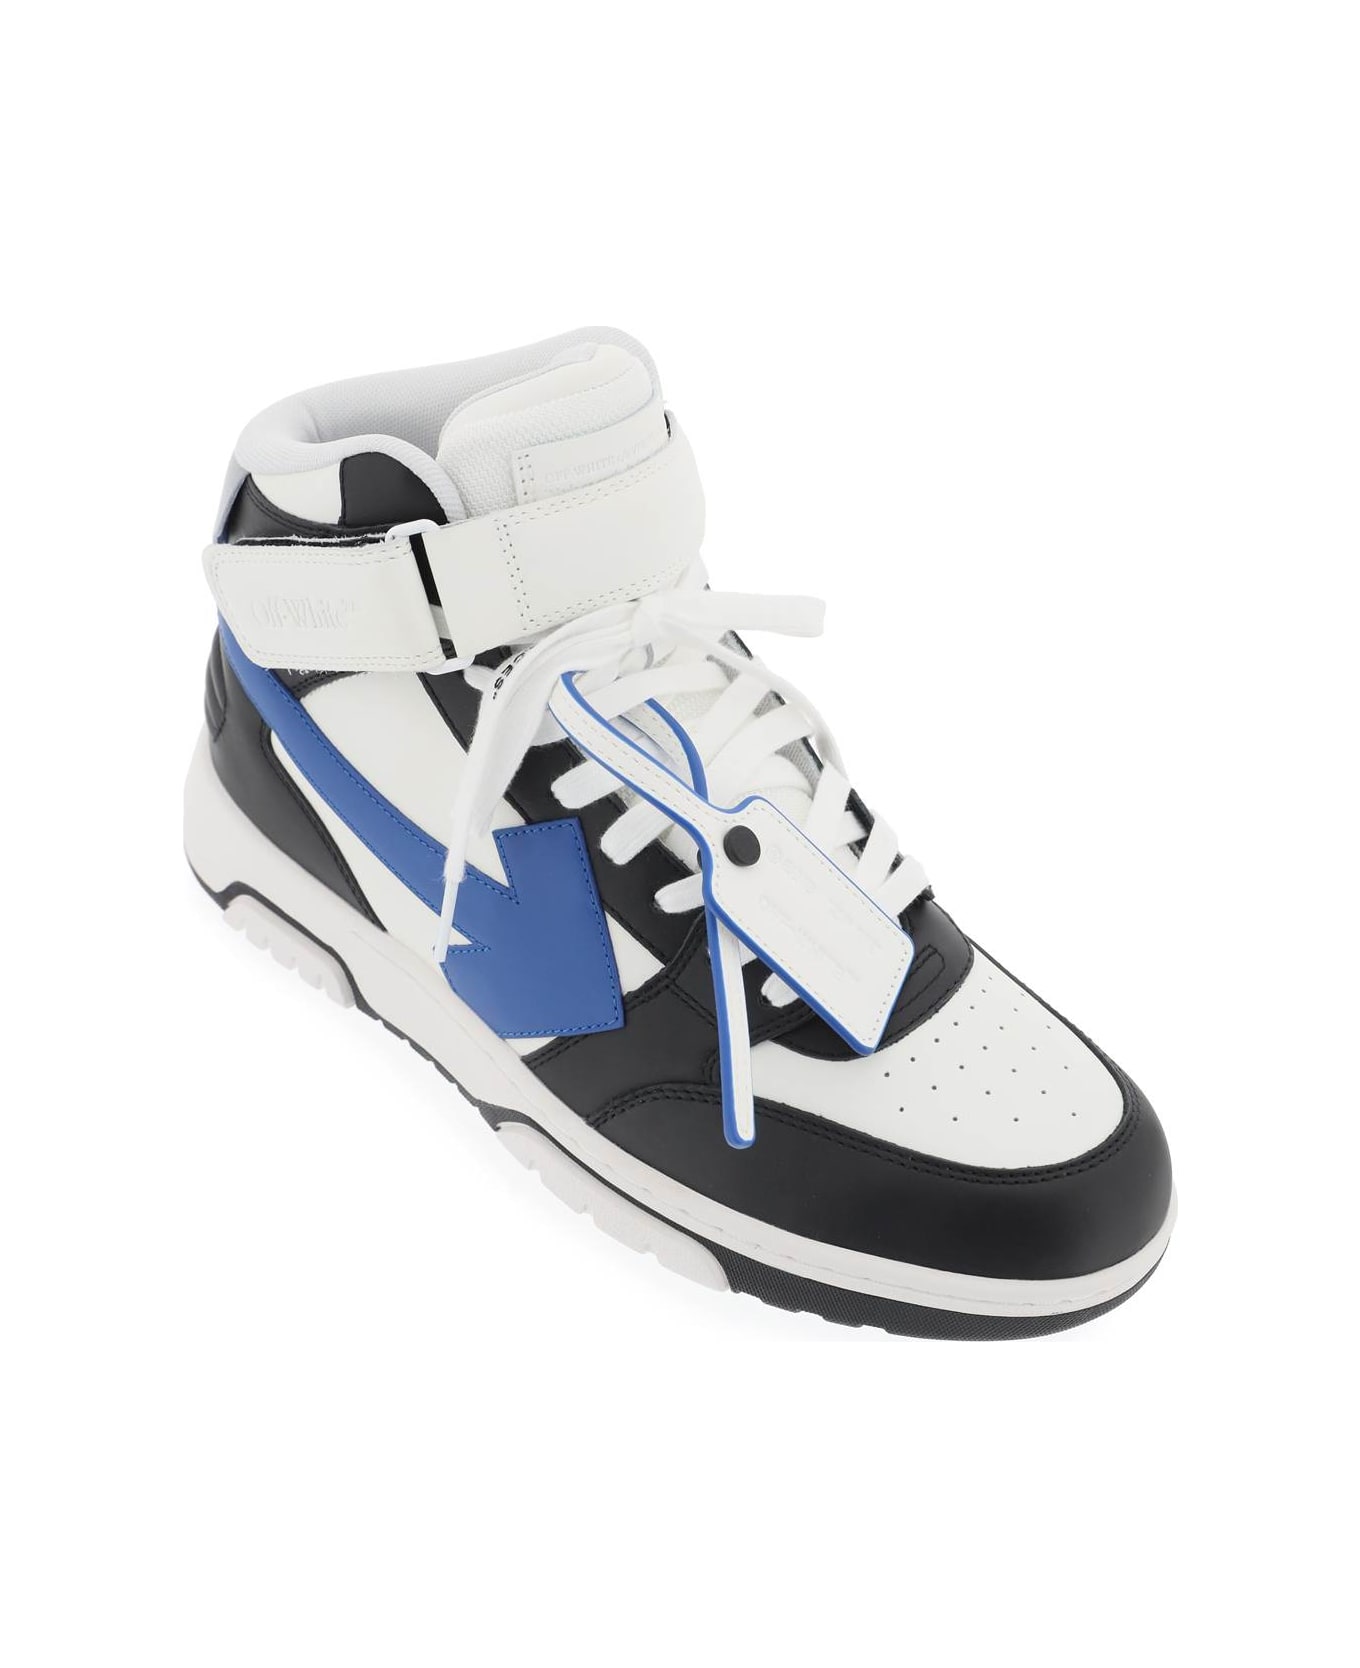 Off-White Out Of Office Sneakers - BLACK NAVY BLU (White)